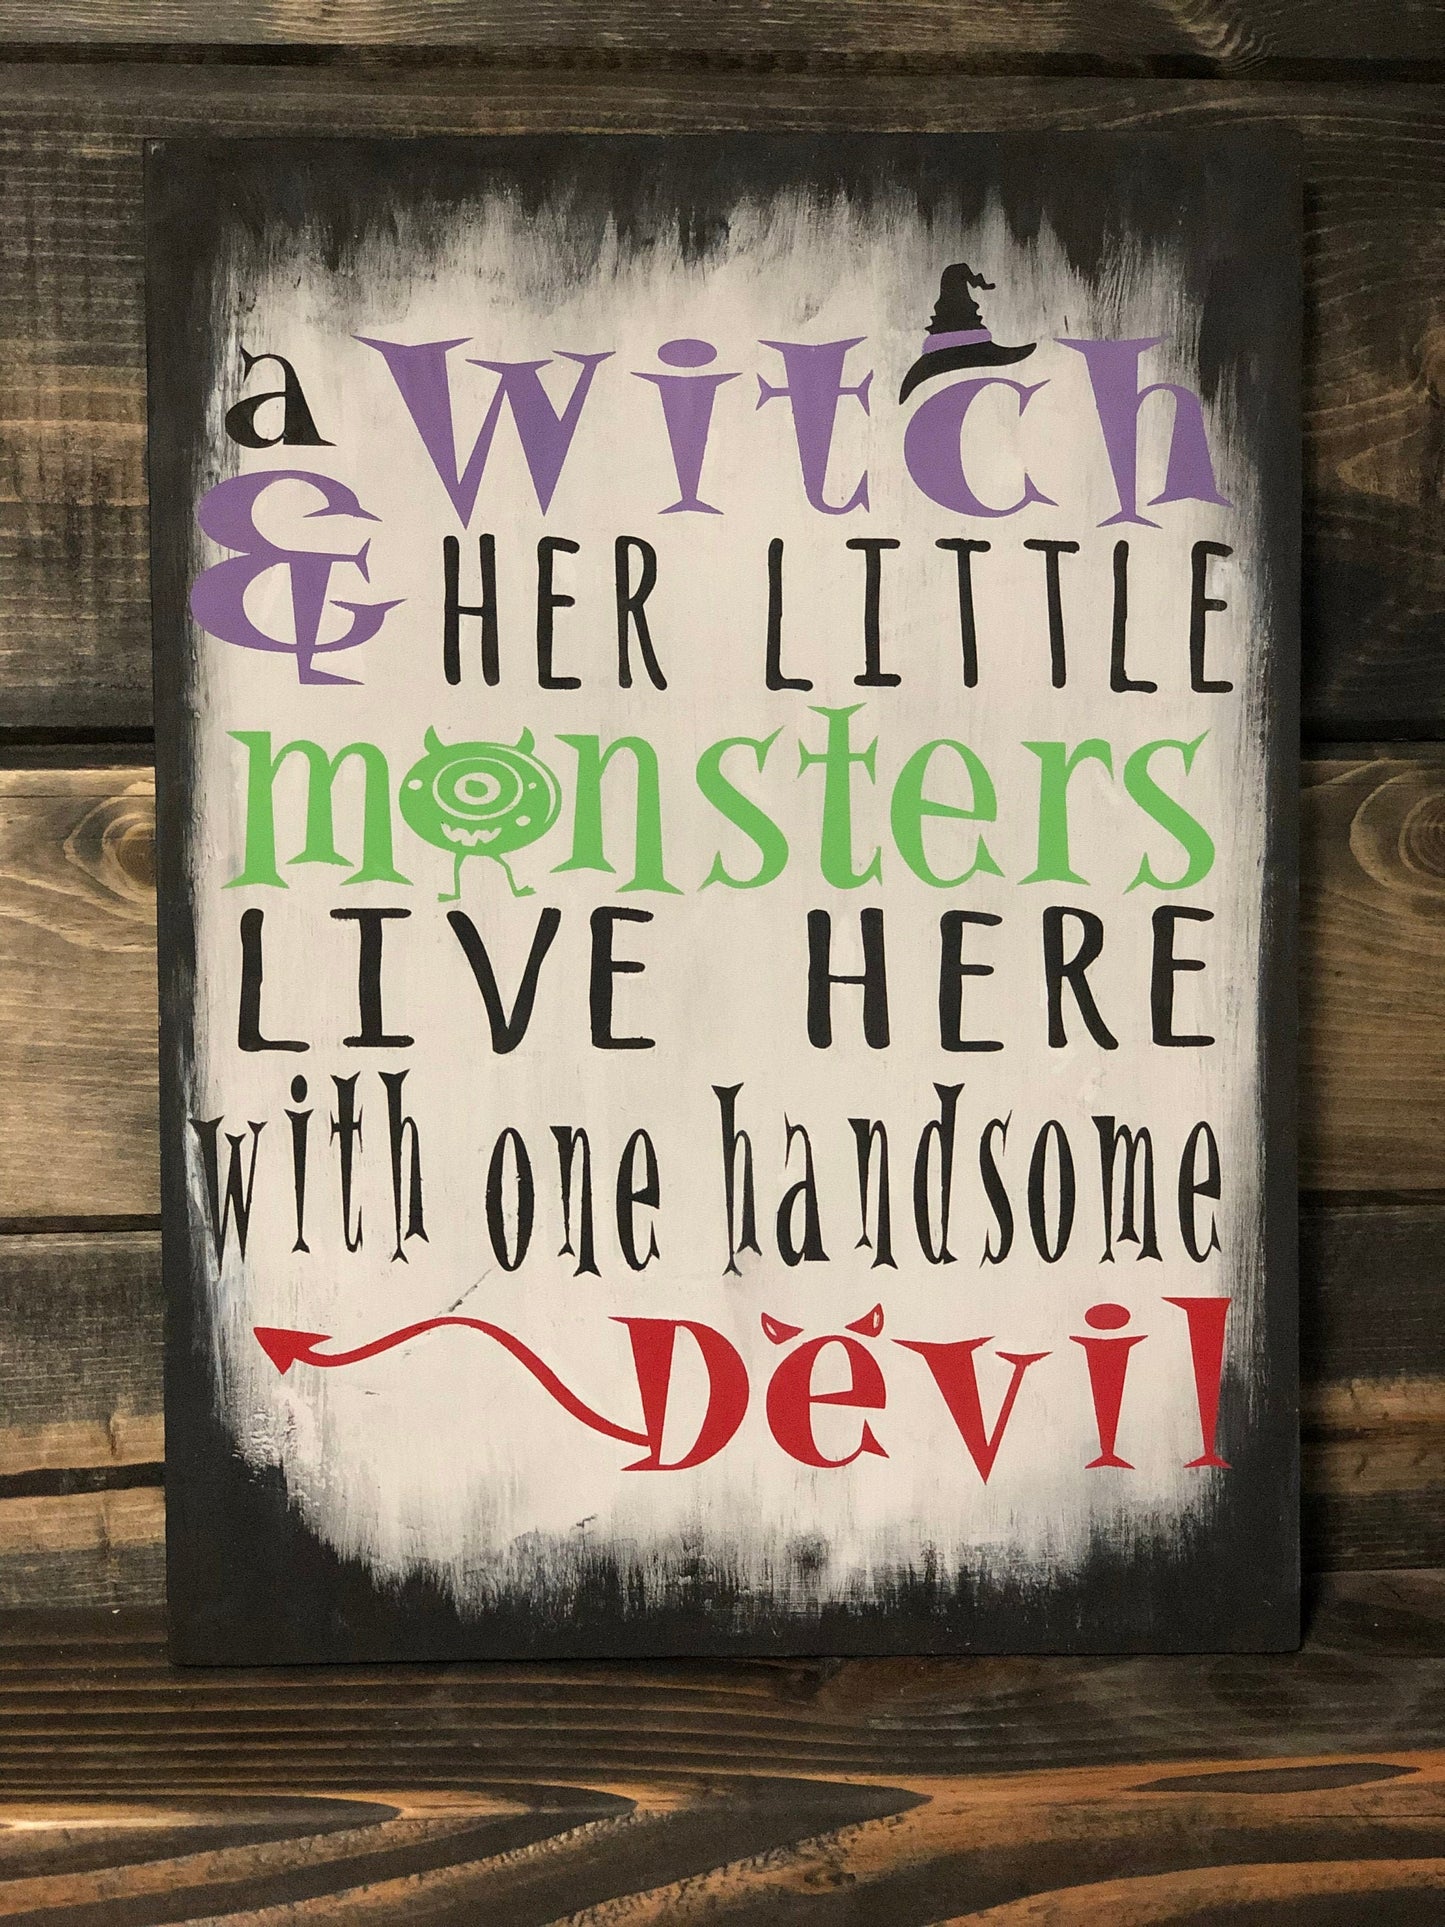 A Witch and Her Little Monsters Live Here With One handsome Devil - Halloween Sign - Halloween Decor